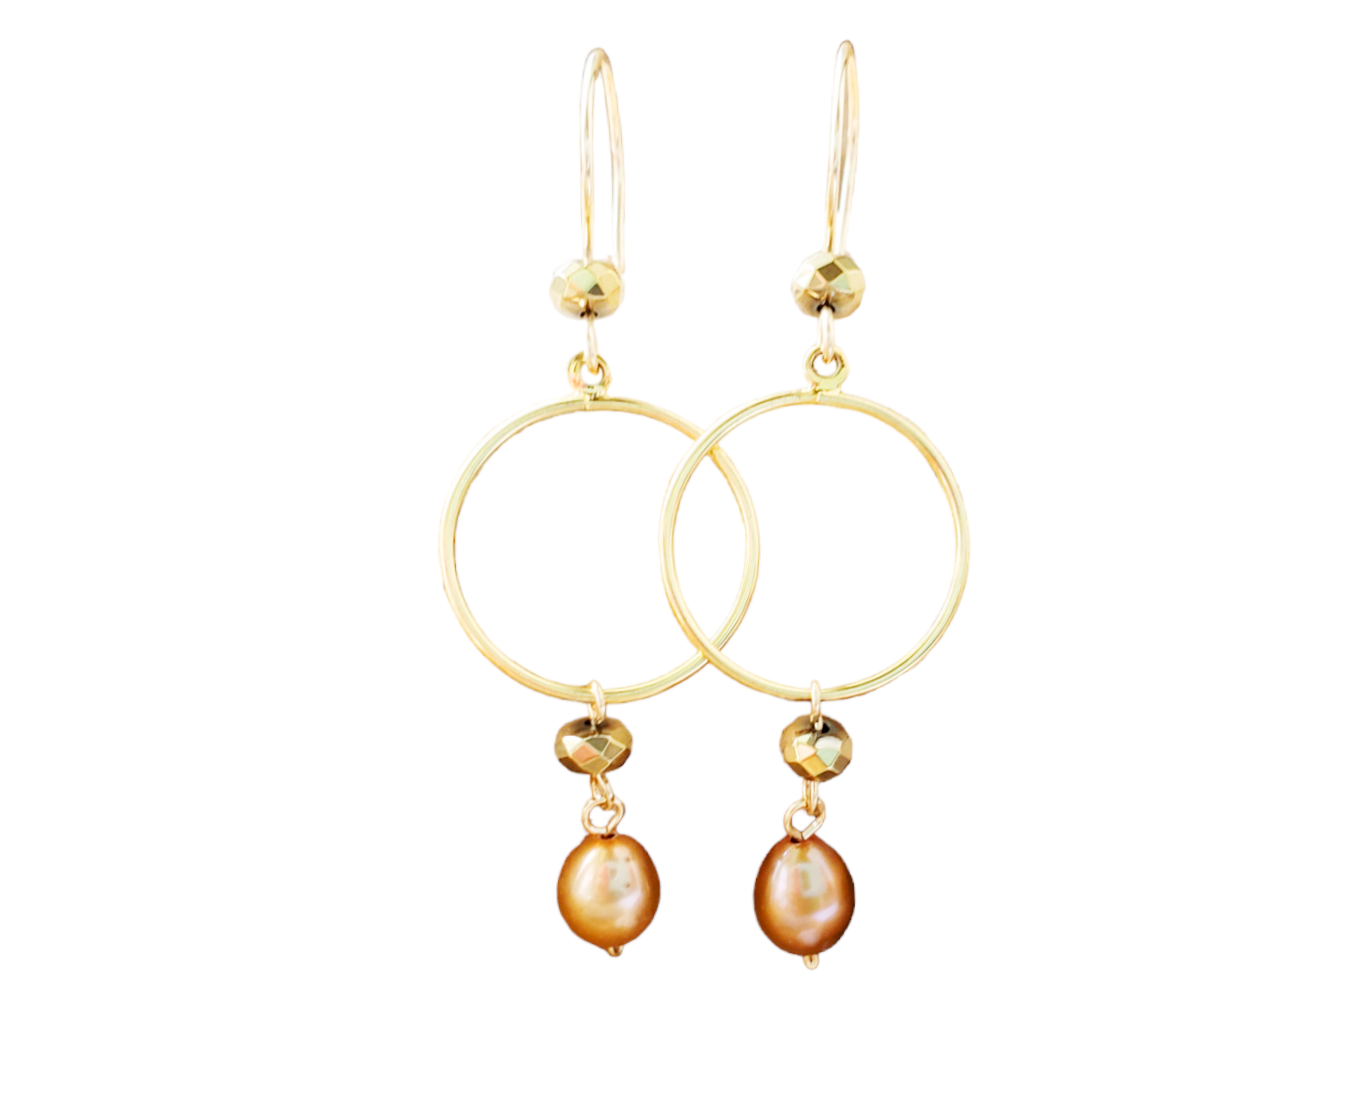 Long Gold Pearl Hoop Dangle Earrings with Gold Freshwater Cultured Pearls and Gold Hematite dangle from the hoops.